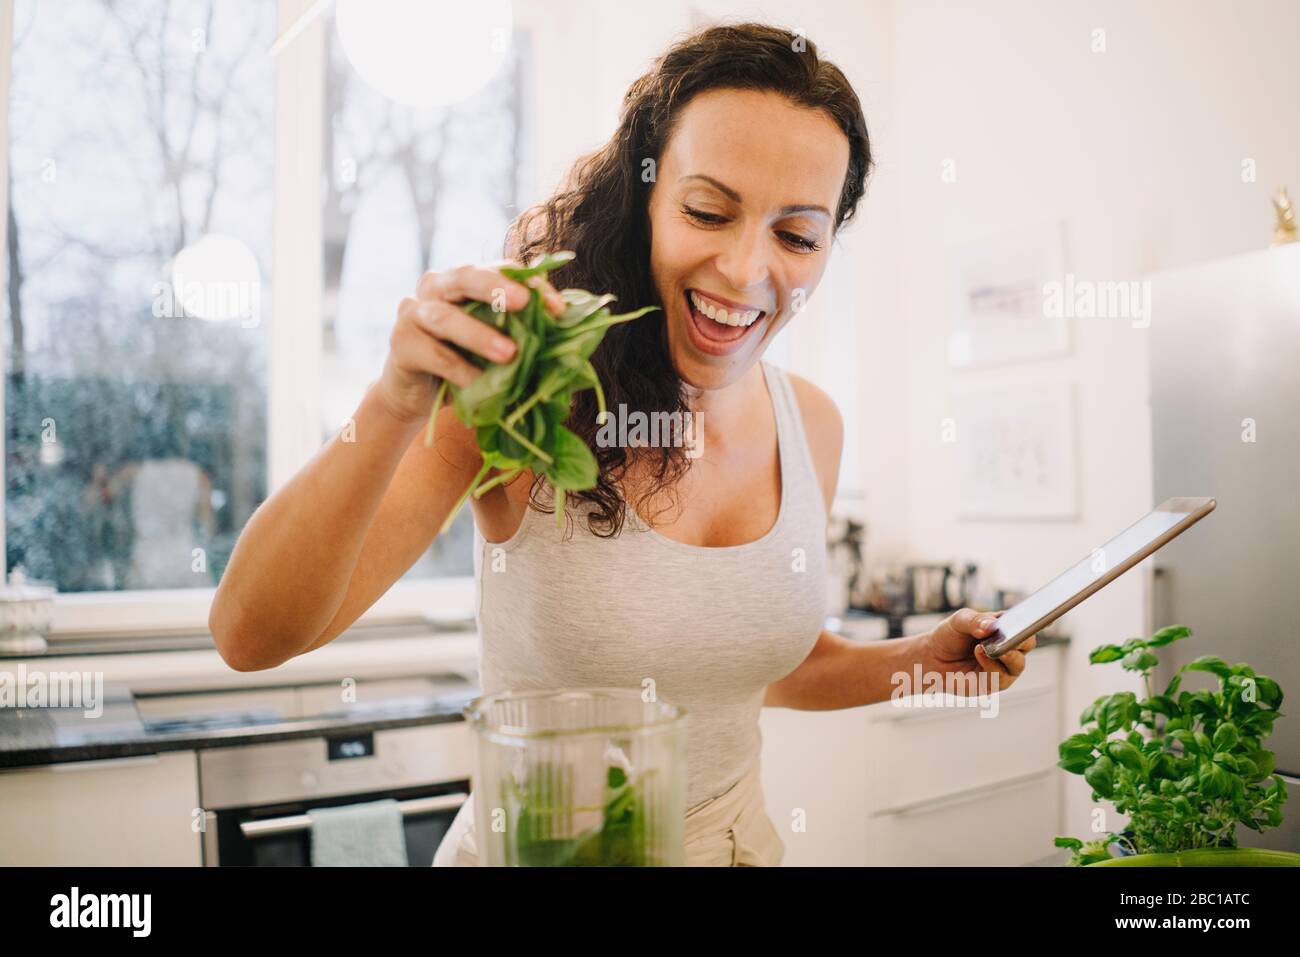 Fit woman standing in kitchen, preparing healthy smoothie, putting ingredients into blender Stock Photo